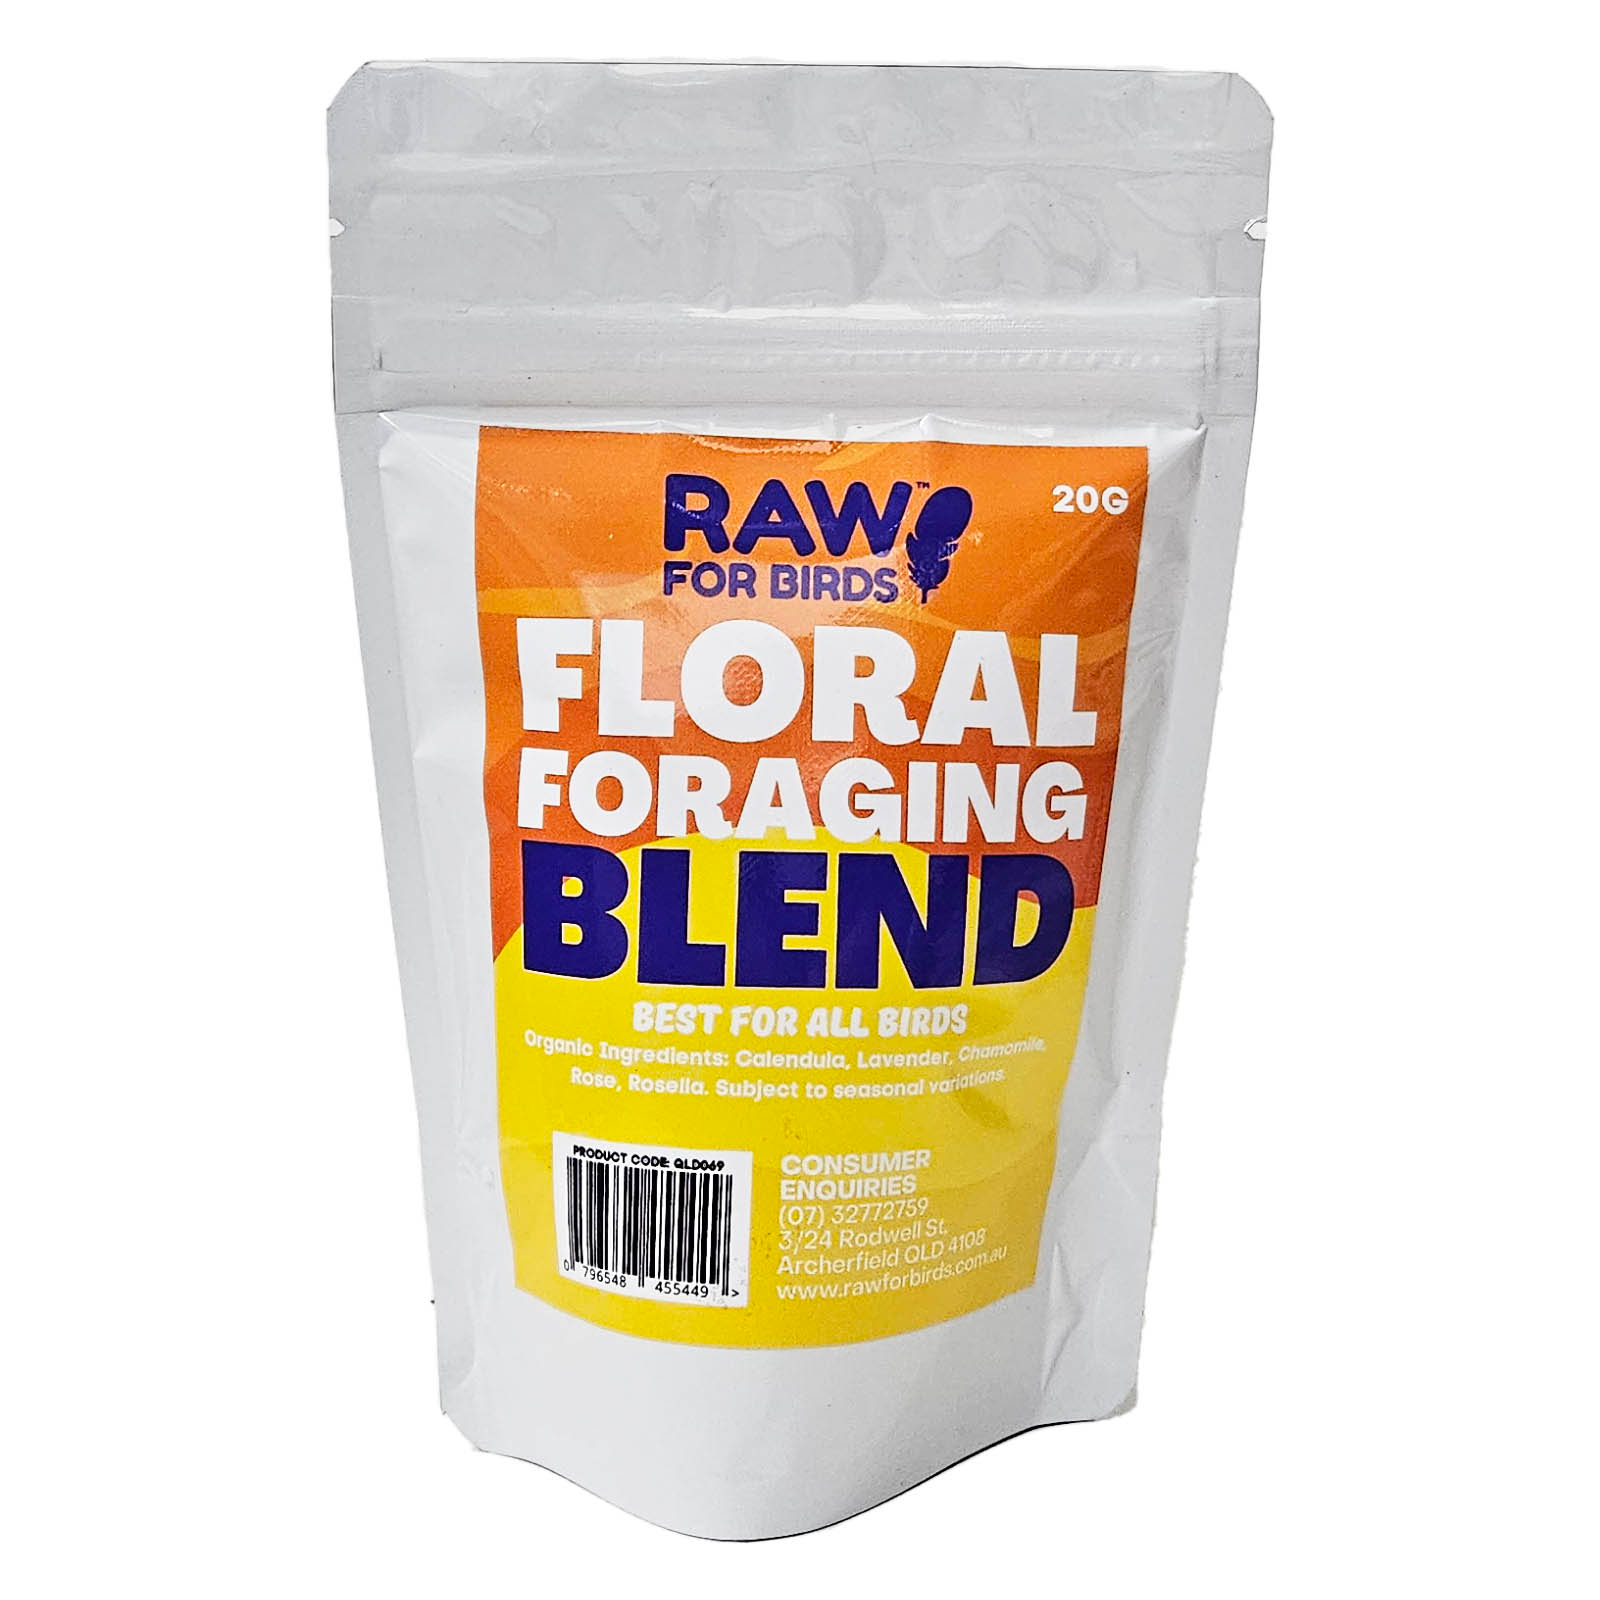 Raw for Birds Floral Foraging Blend